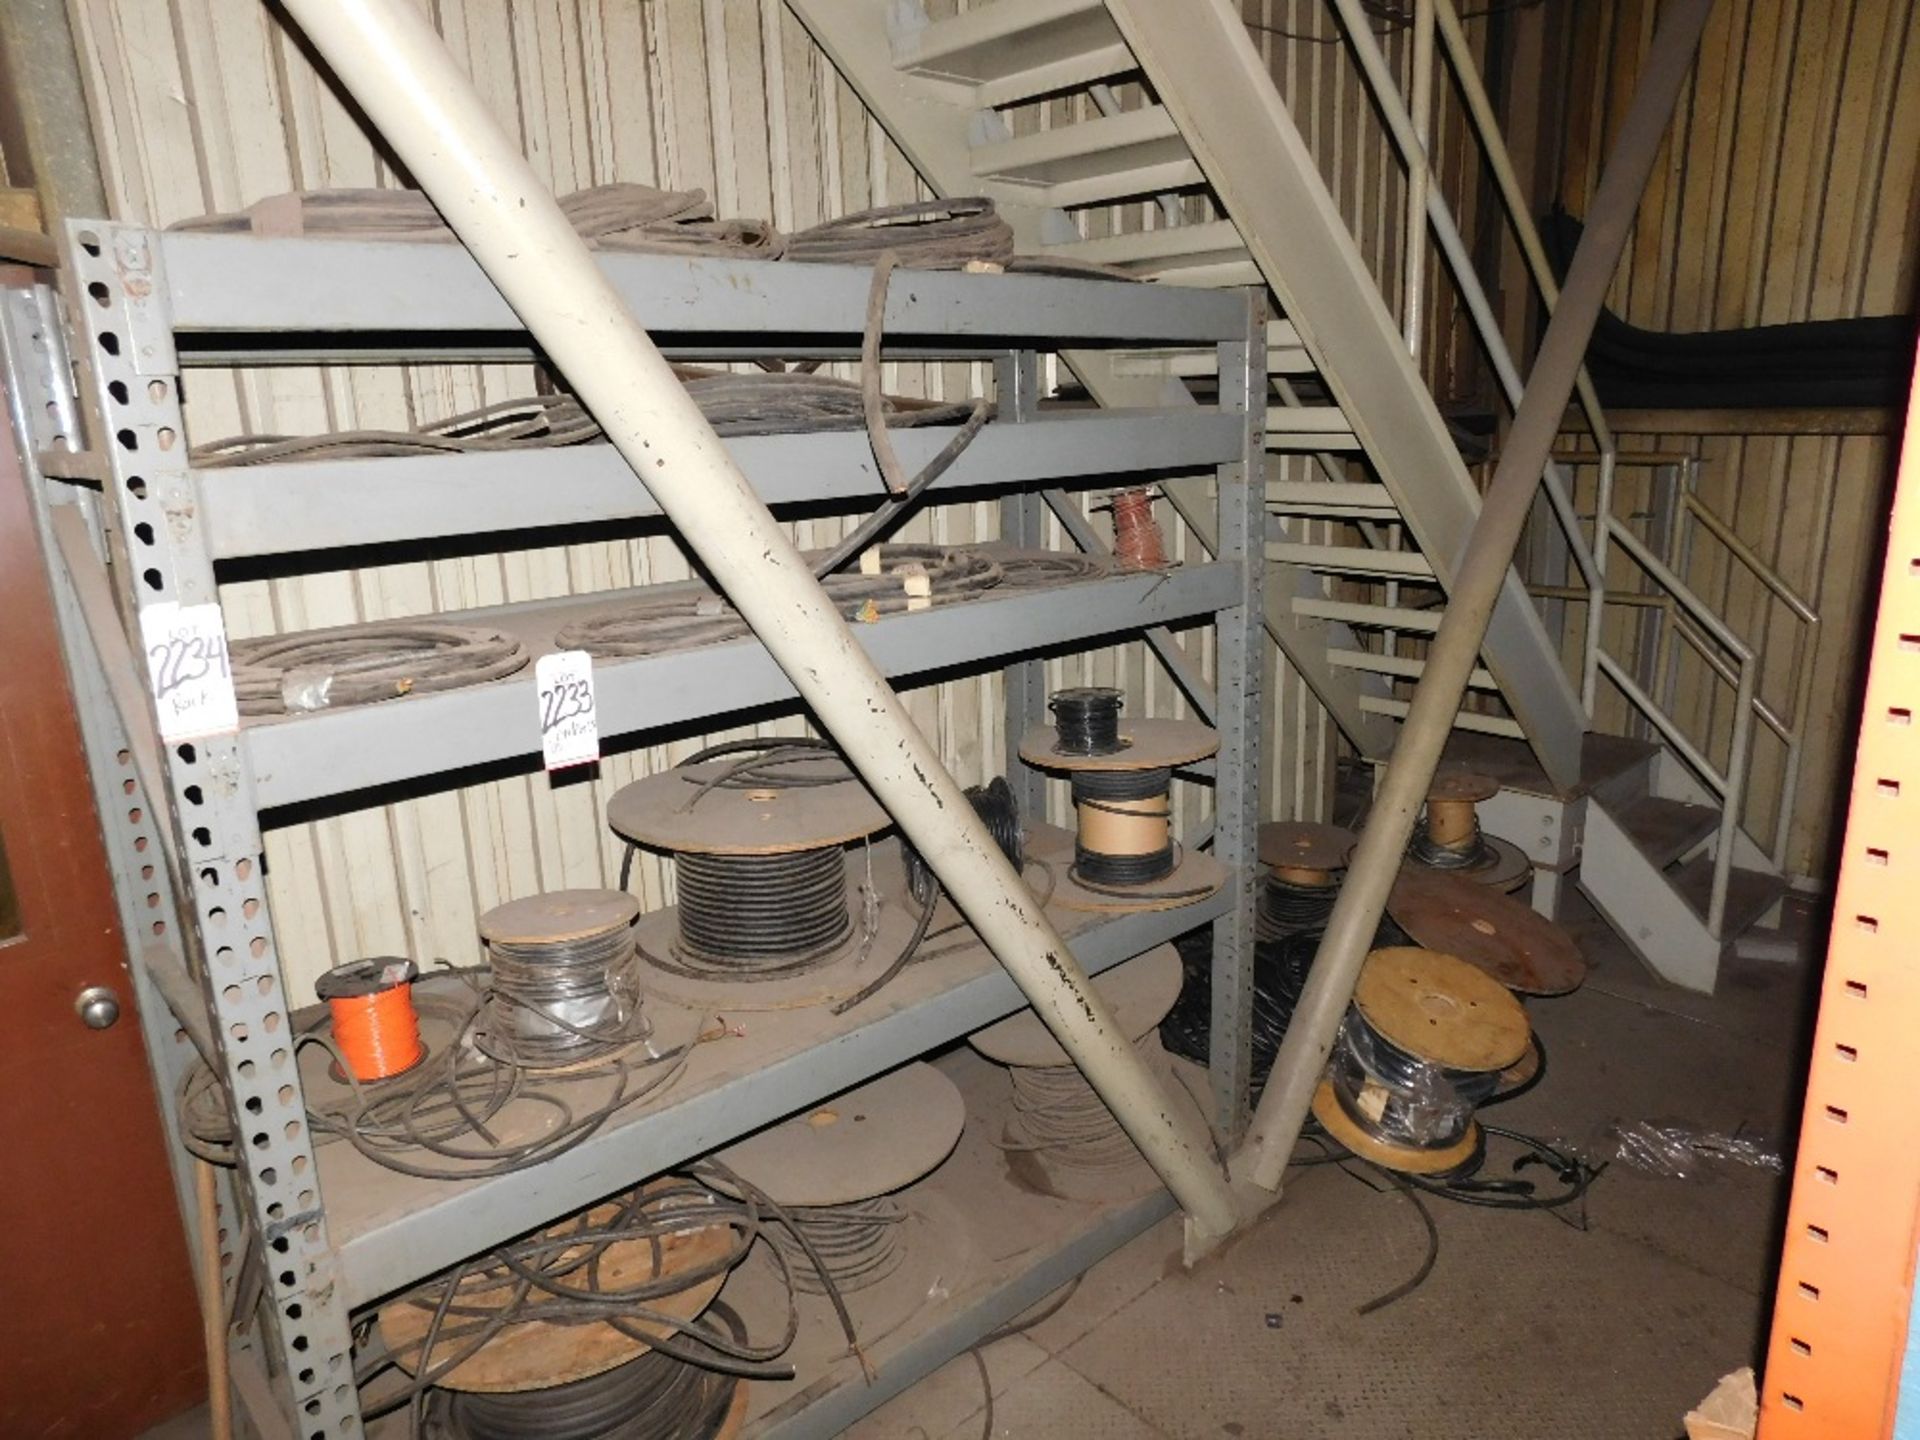 LOT - CONTENTS OF RACK ONLY: WIRE SPOOLS, PLUS SPOOLS ON FLOOR NEXT TO RACK (RACK NOT INCLUDED)